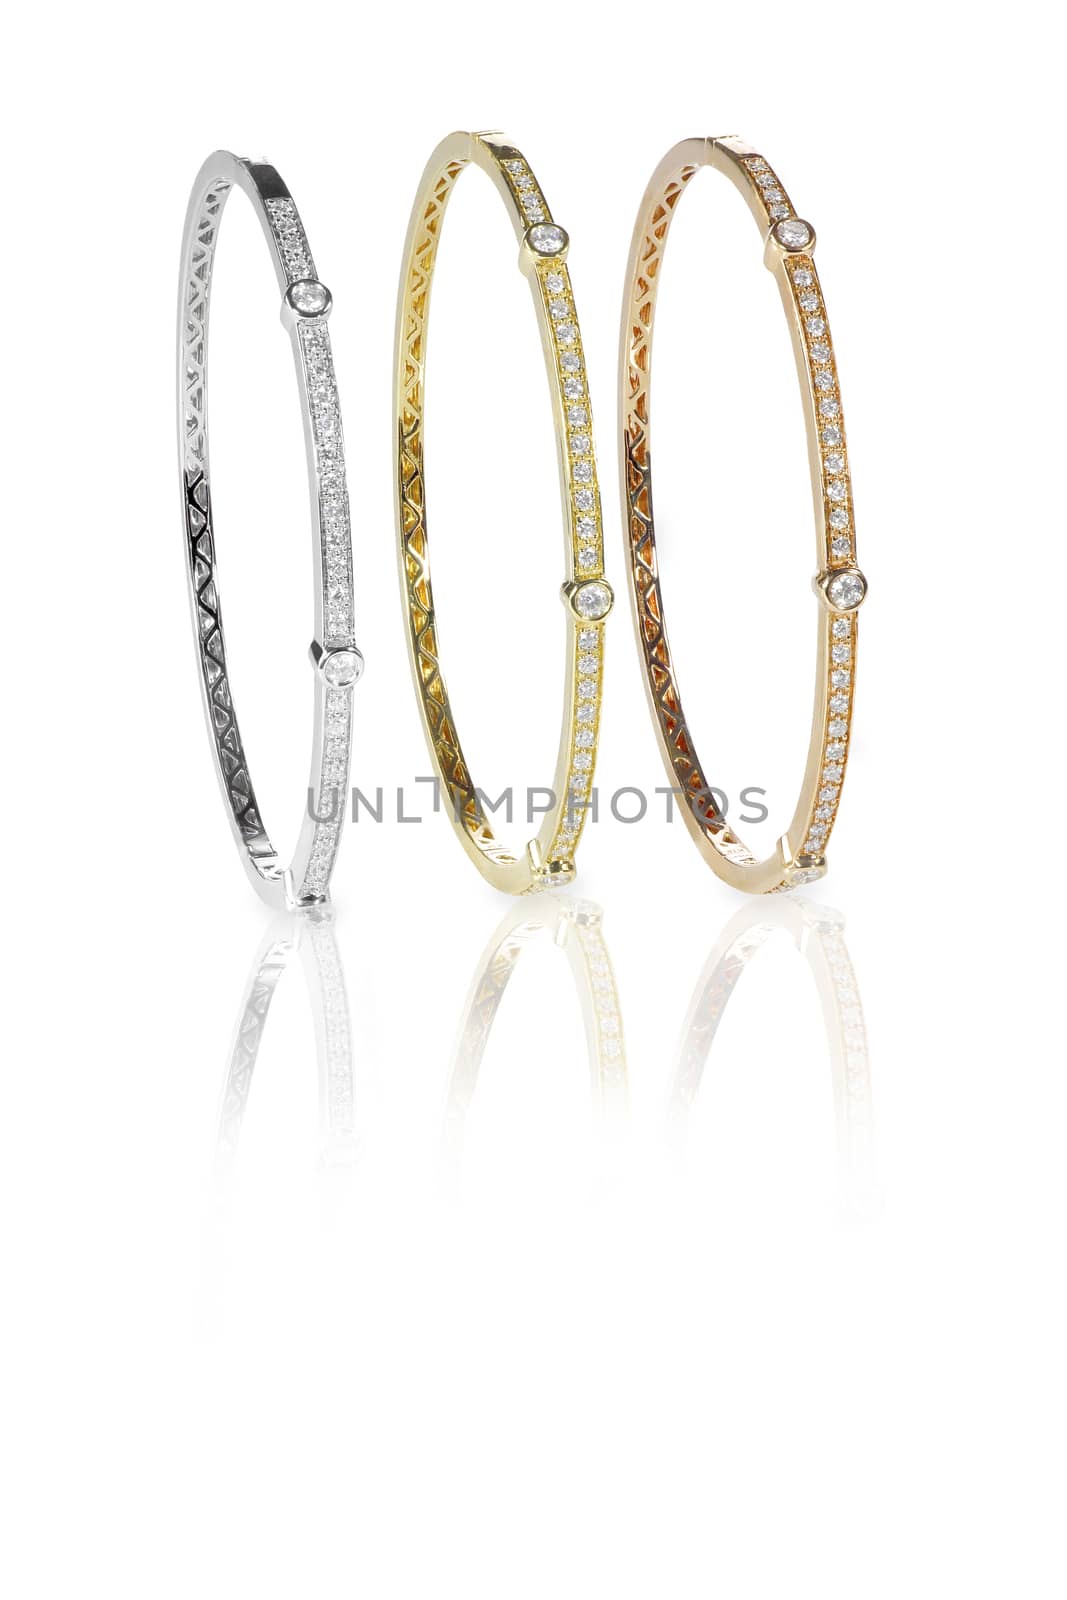 Set of three colored gold diamond bangle bracelets standing upright isolated on white with a reflection